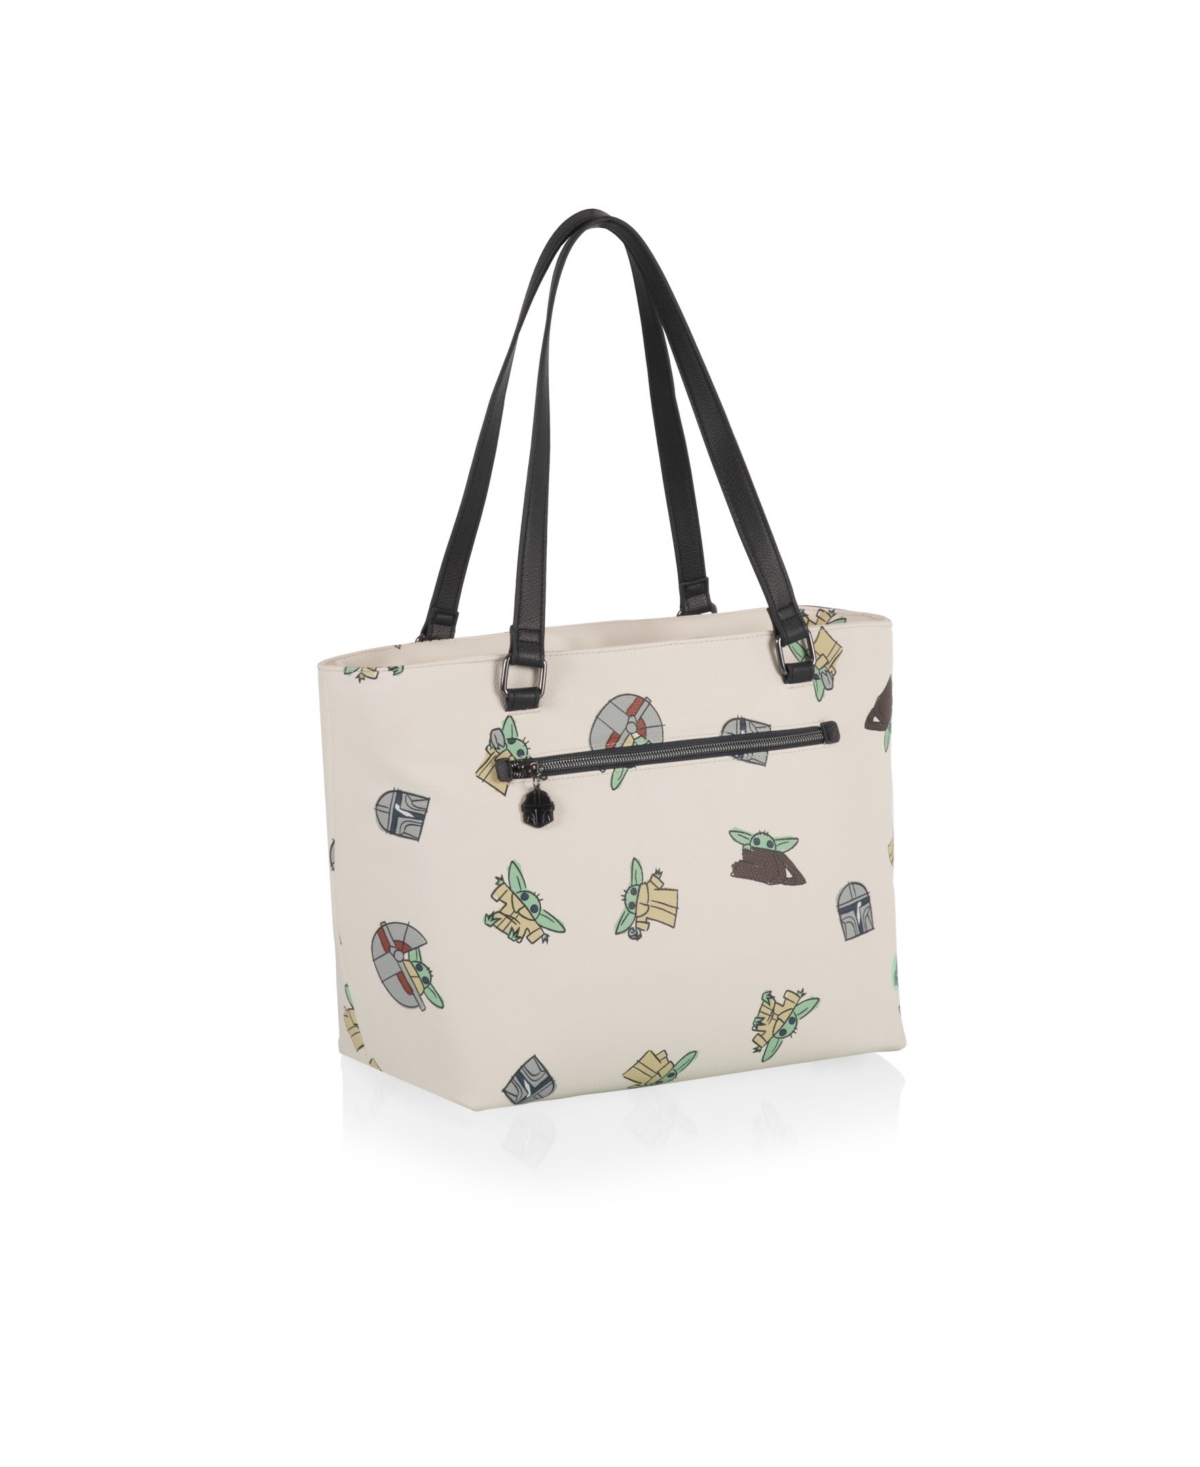 Disney Star Wars Uptown Cooler Tote Bag In Butter Yellow